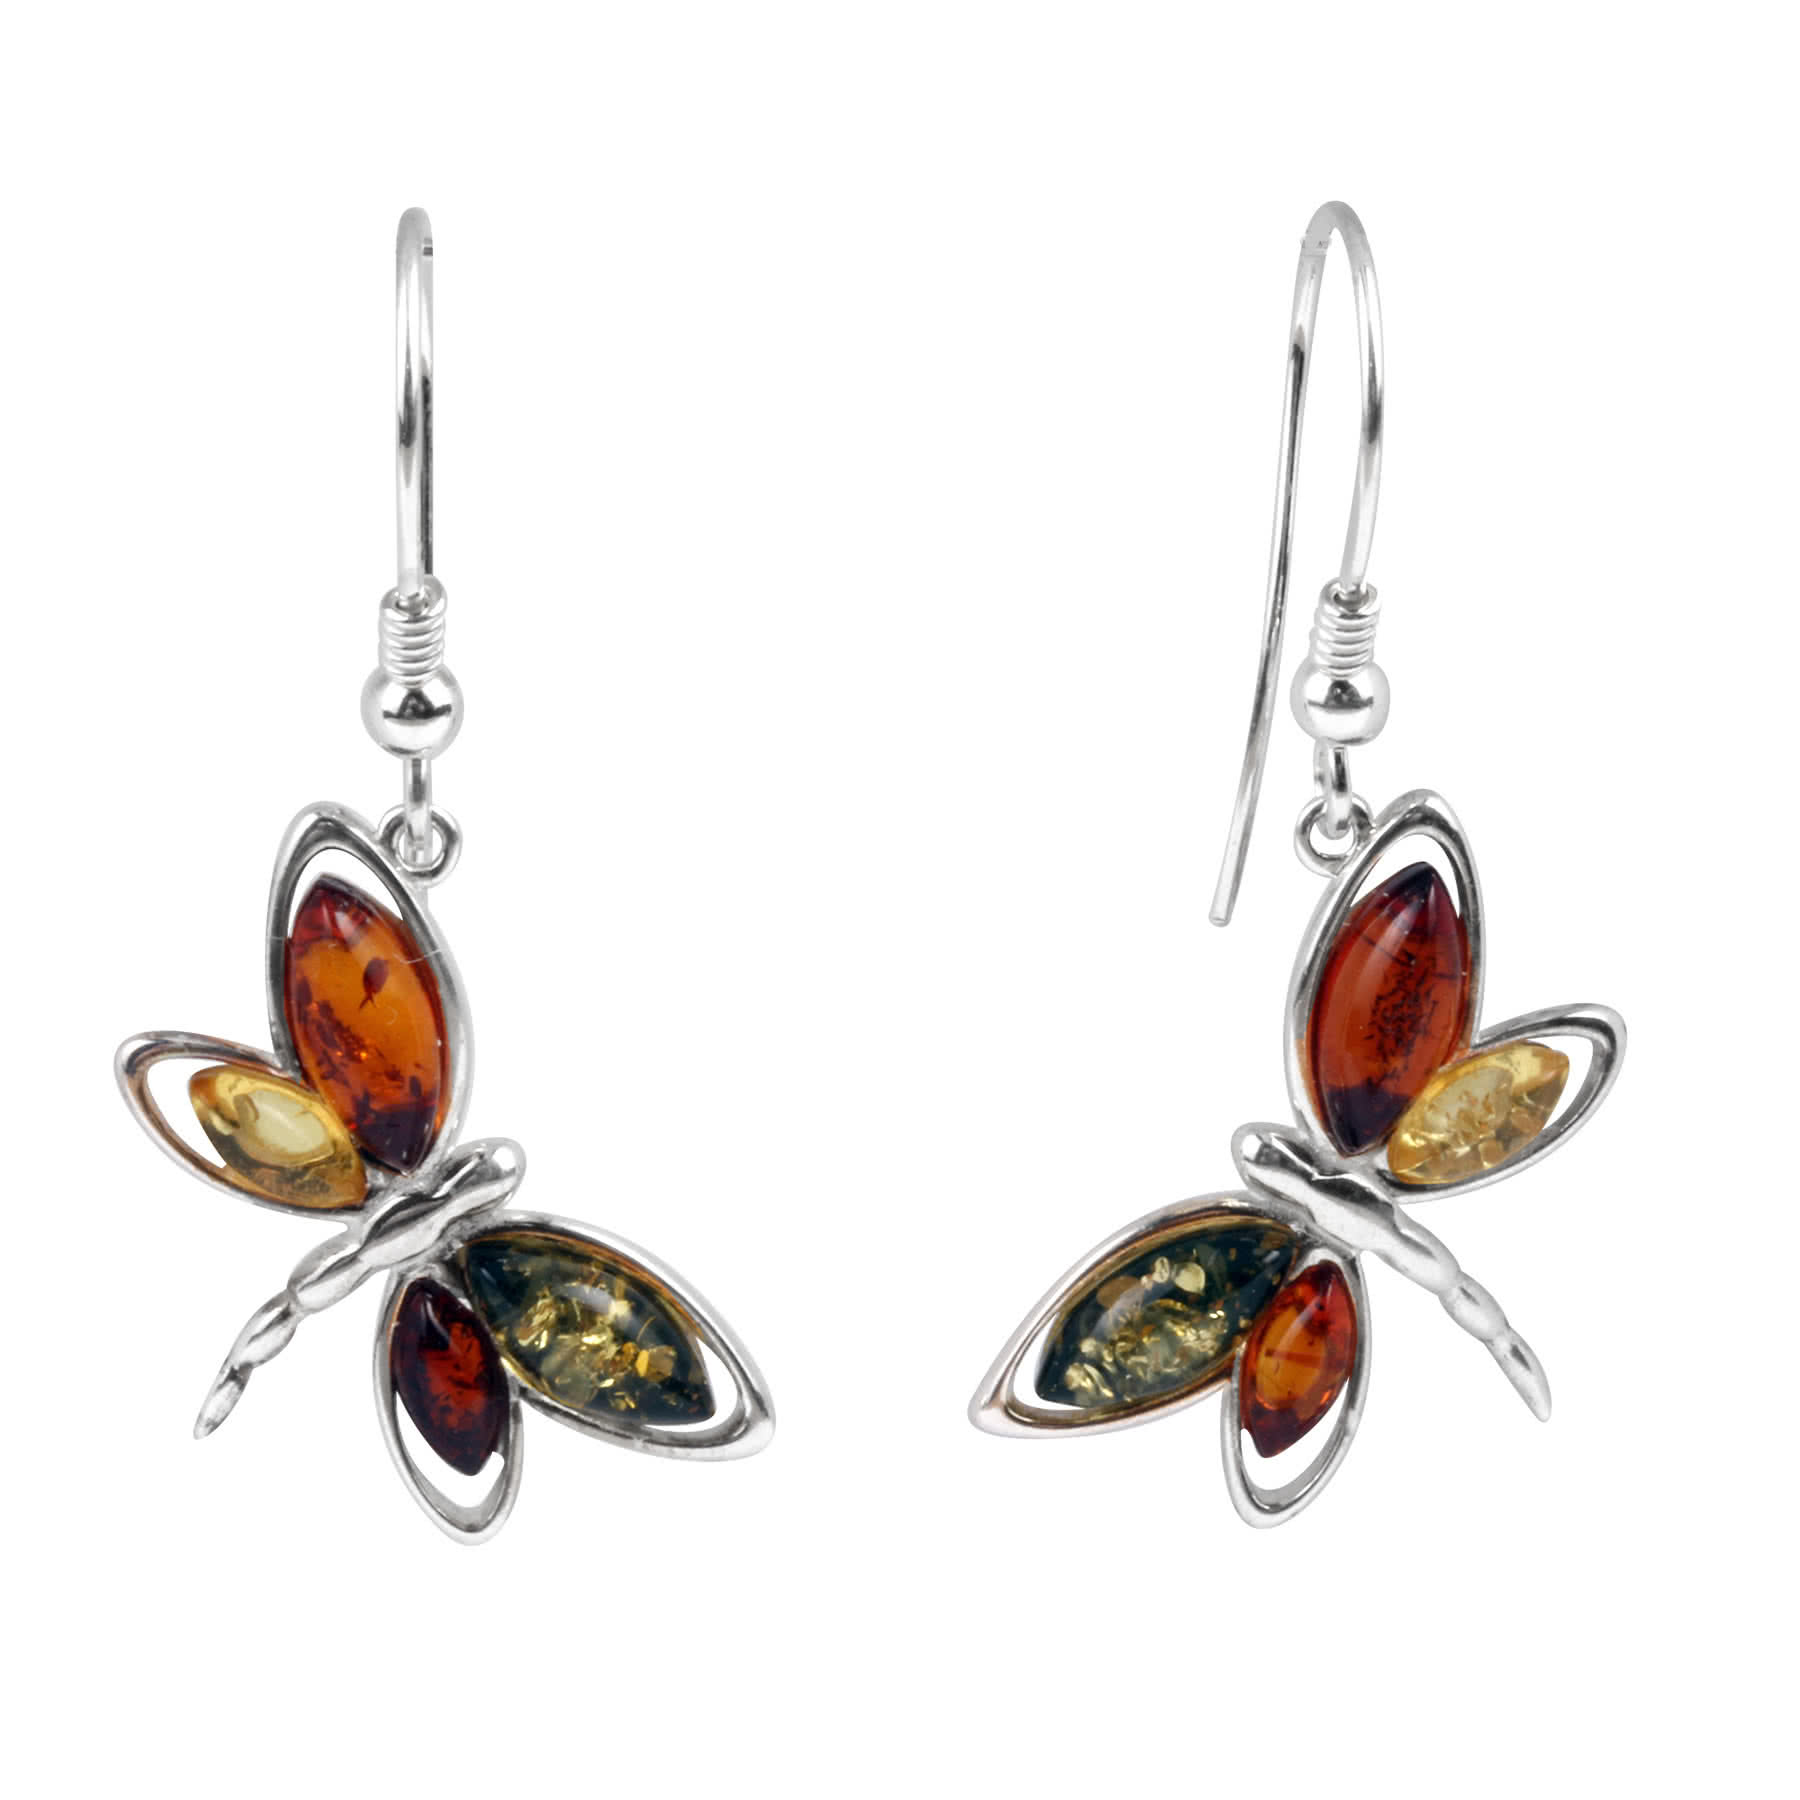 Amber Dragonfly Earrings - Sterling Silver